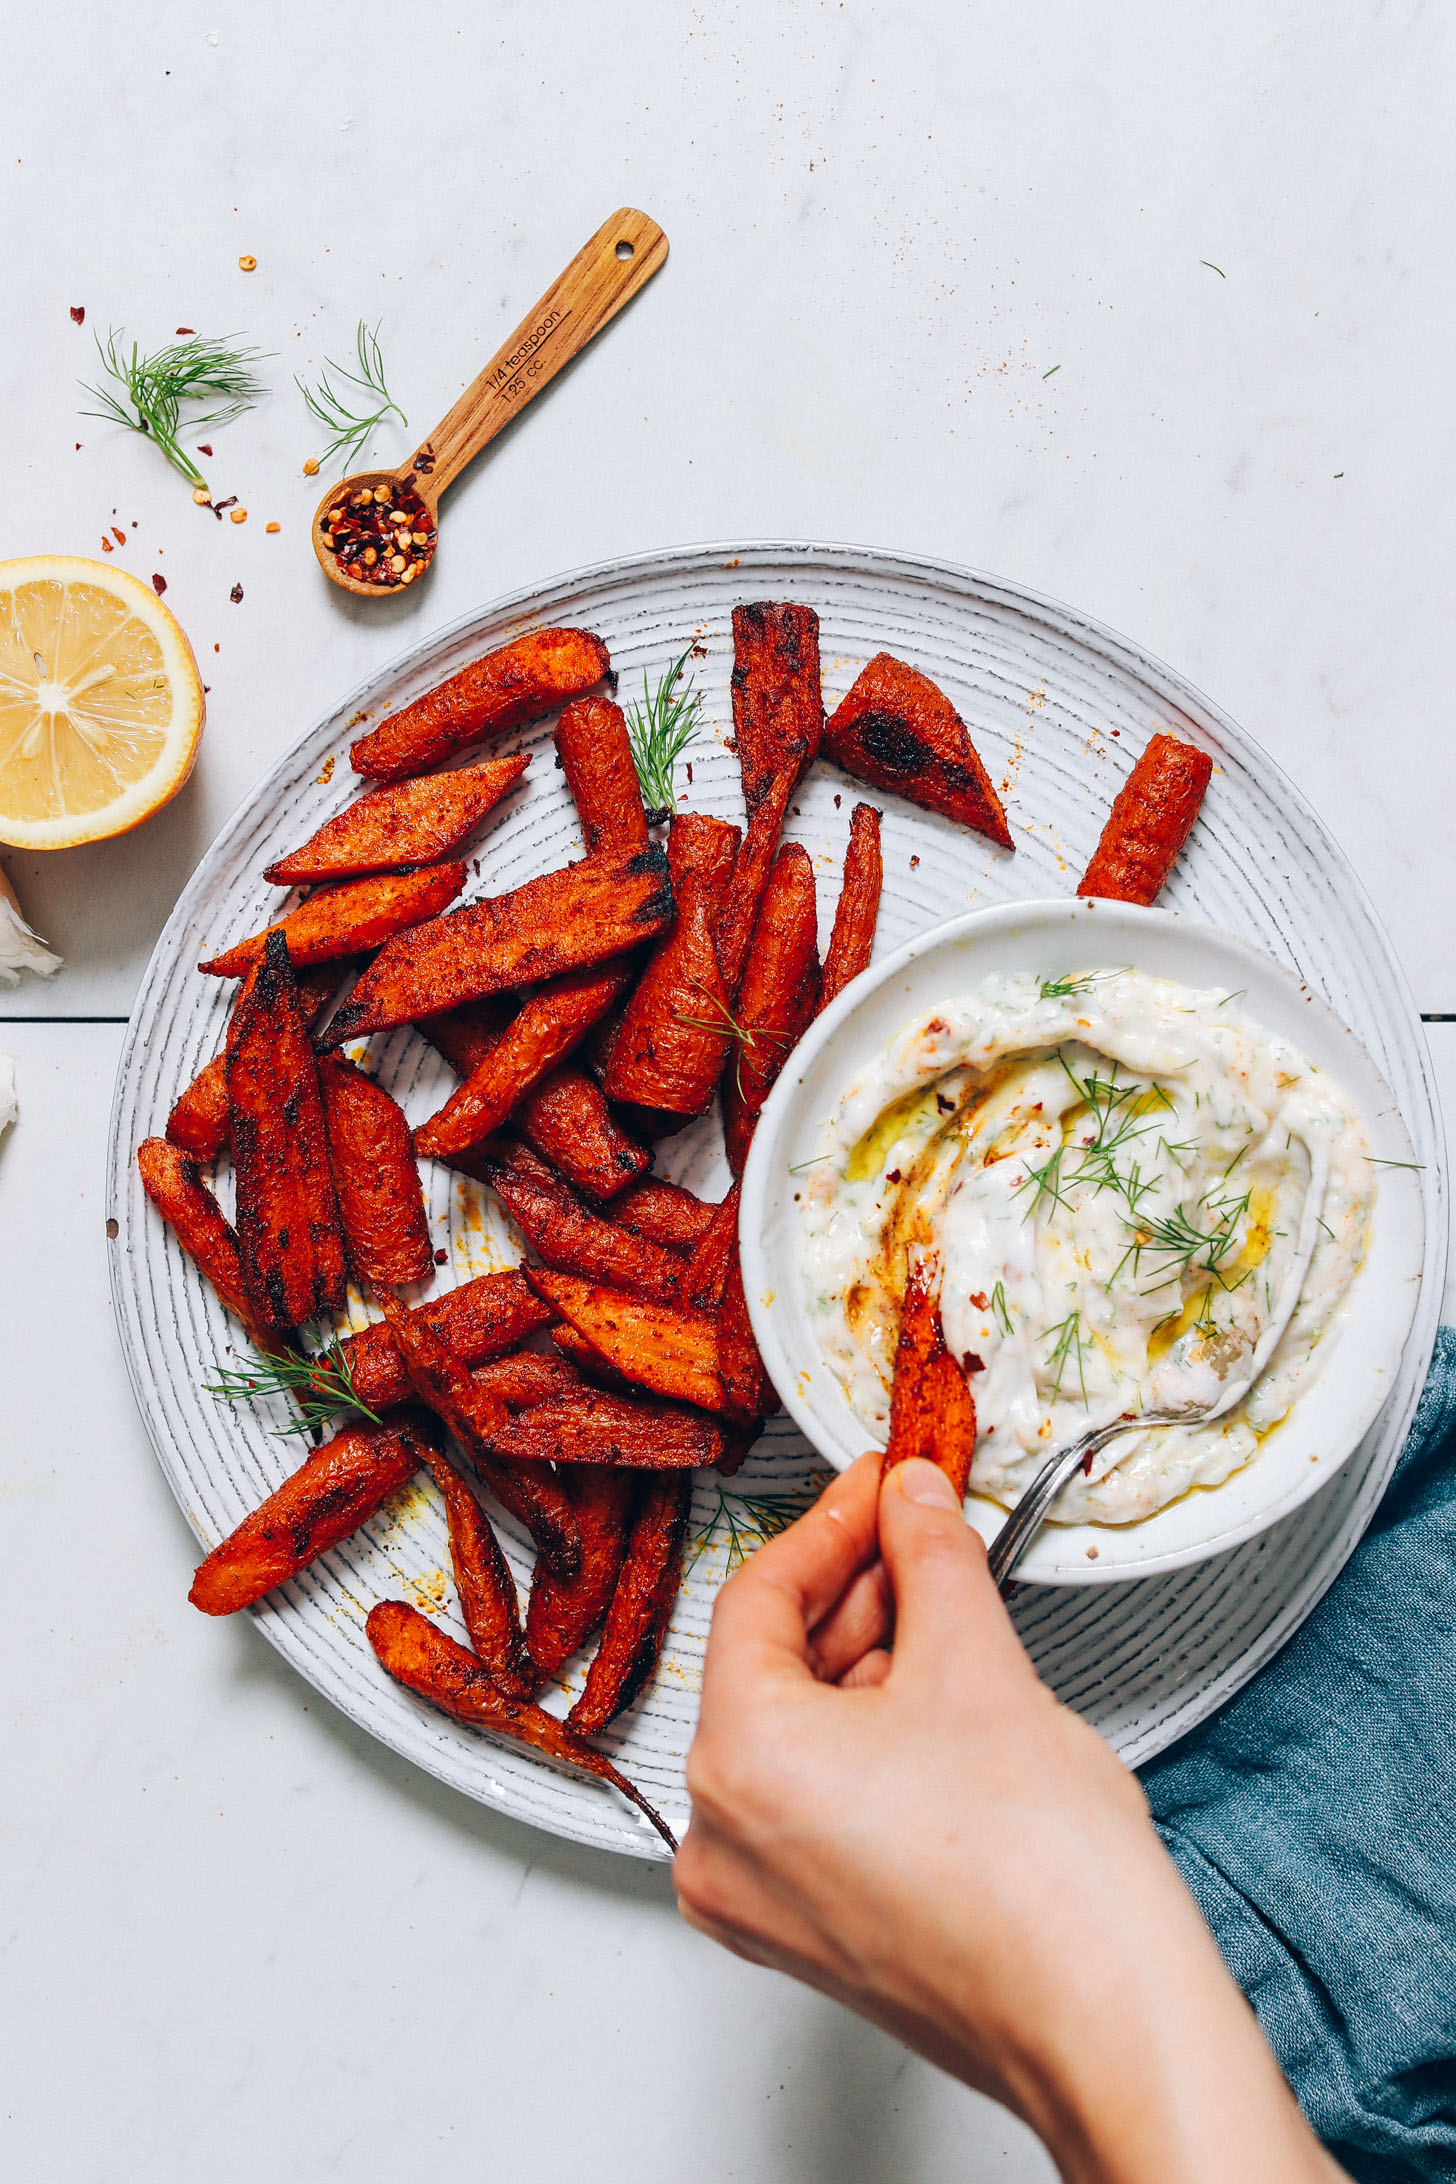 Dipping a roasted carrot slice into a bowl of Zesty Dairy-Free Yogurt Dip